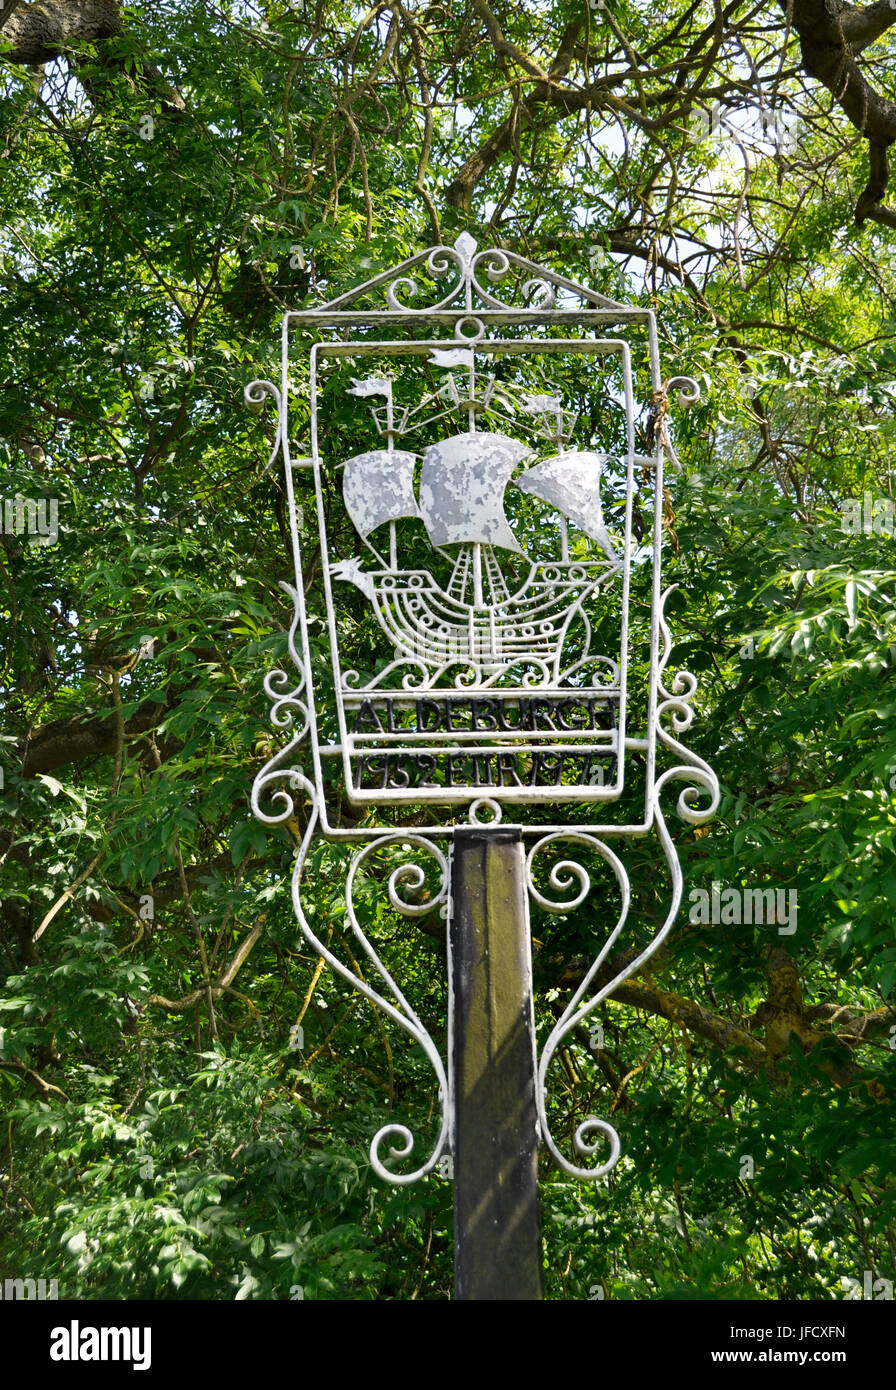 silver jubilee town sign aldeburgh Stock Photo